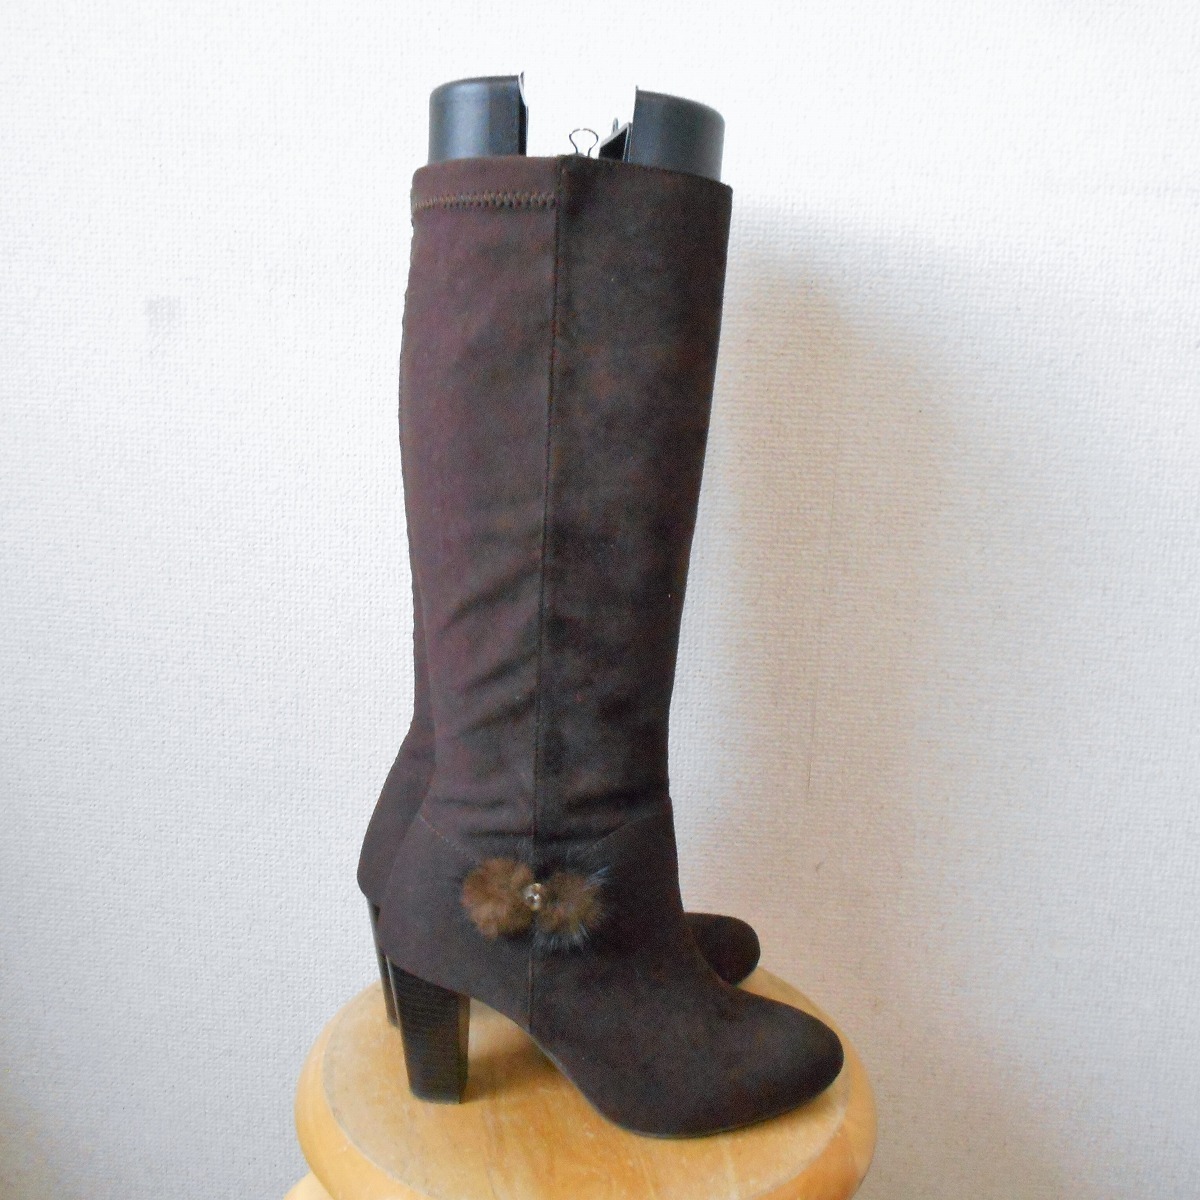  Feroux Feroux Onward . mountain bonbon. pretty lady's for rom and rear (before and after) switch soft . long boots M